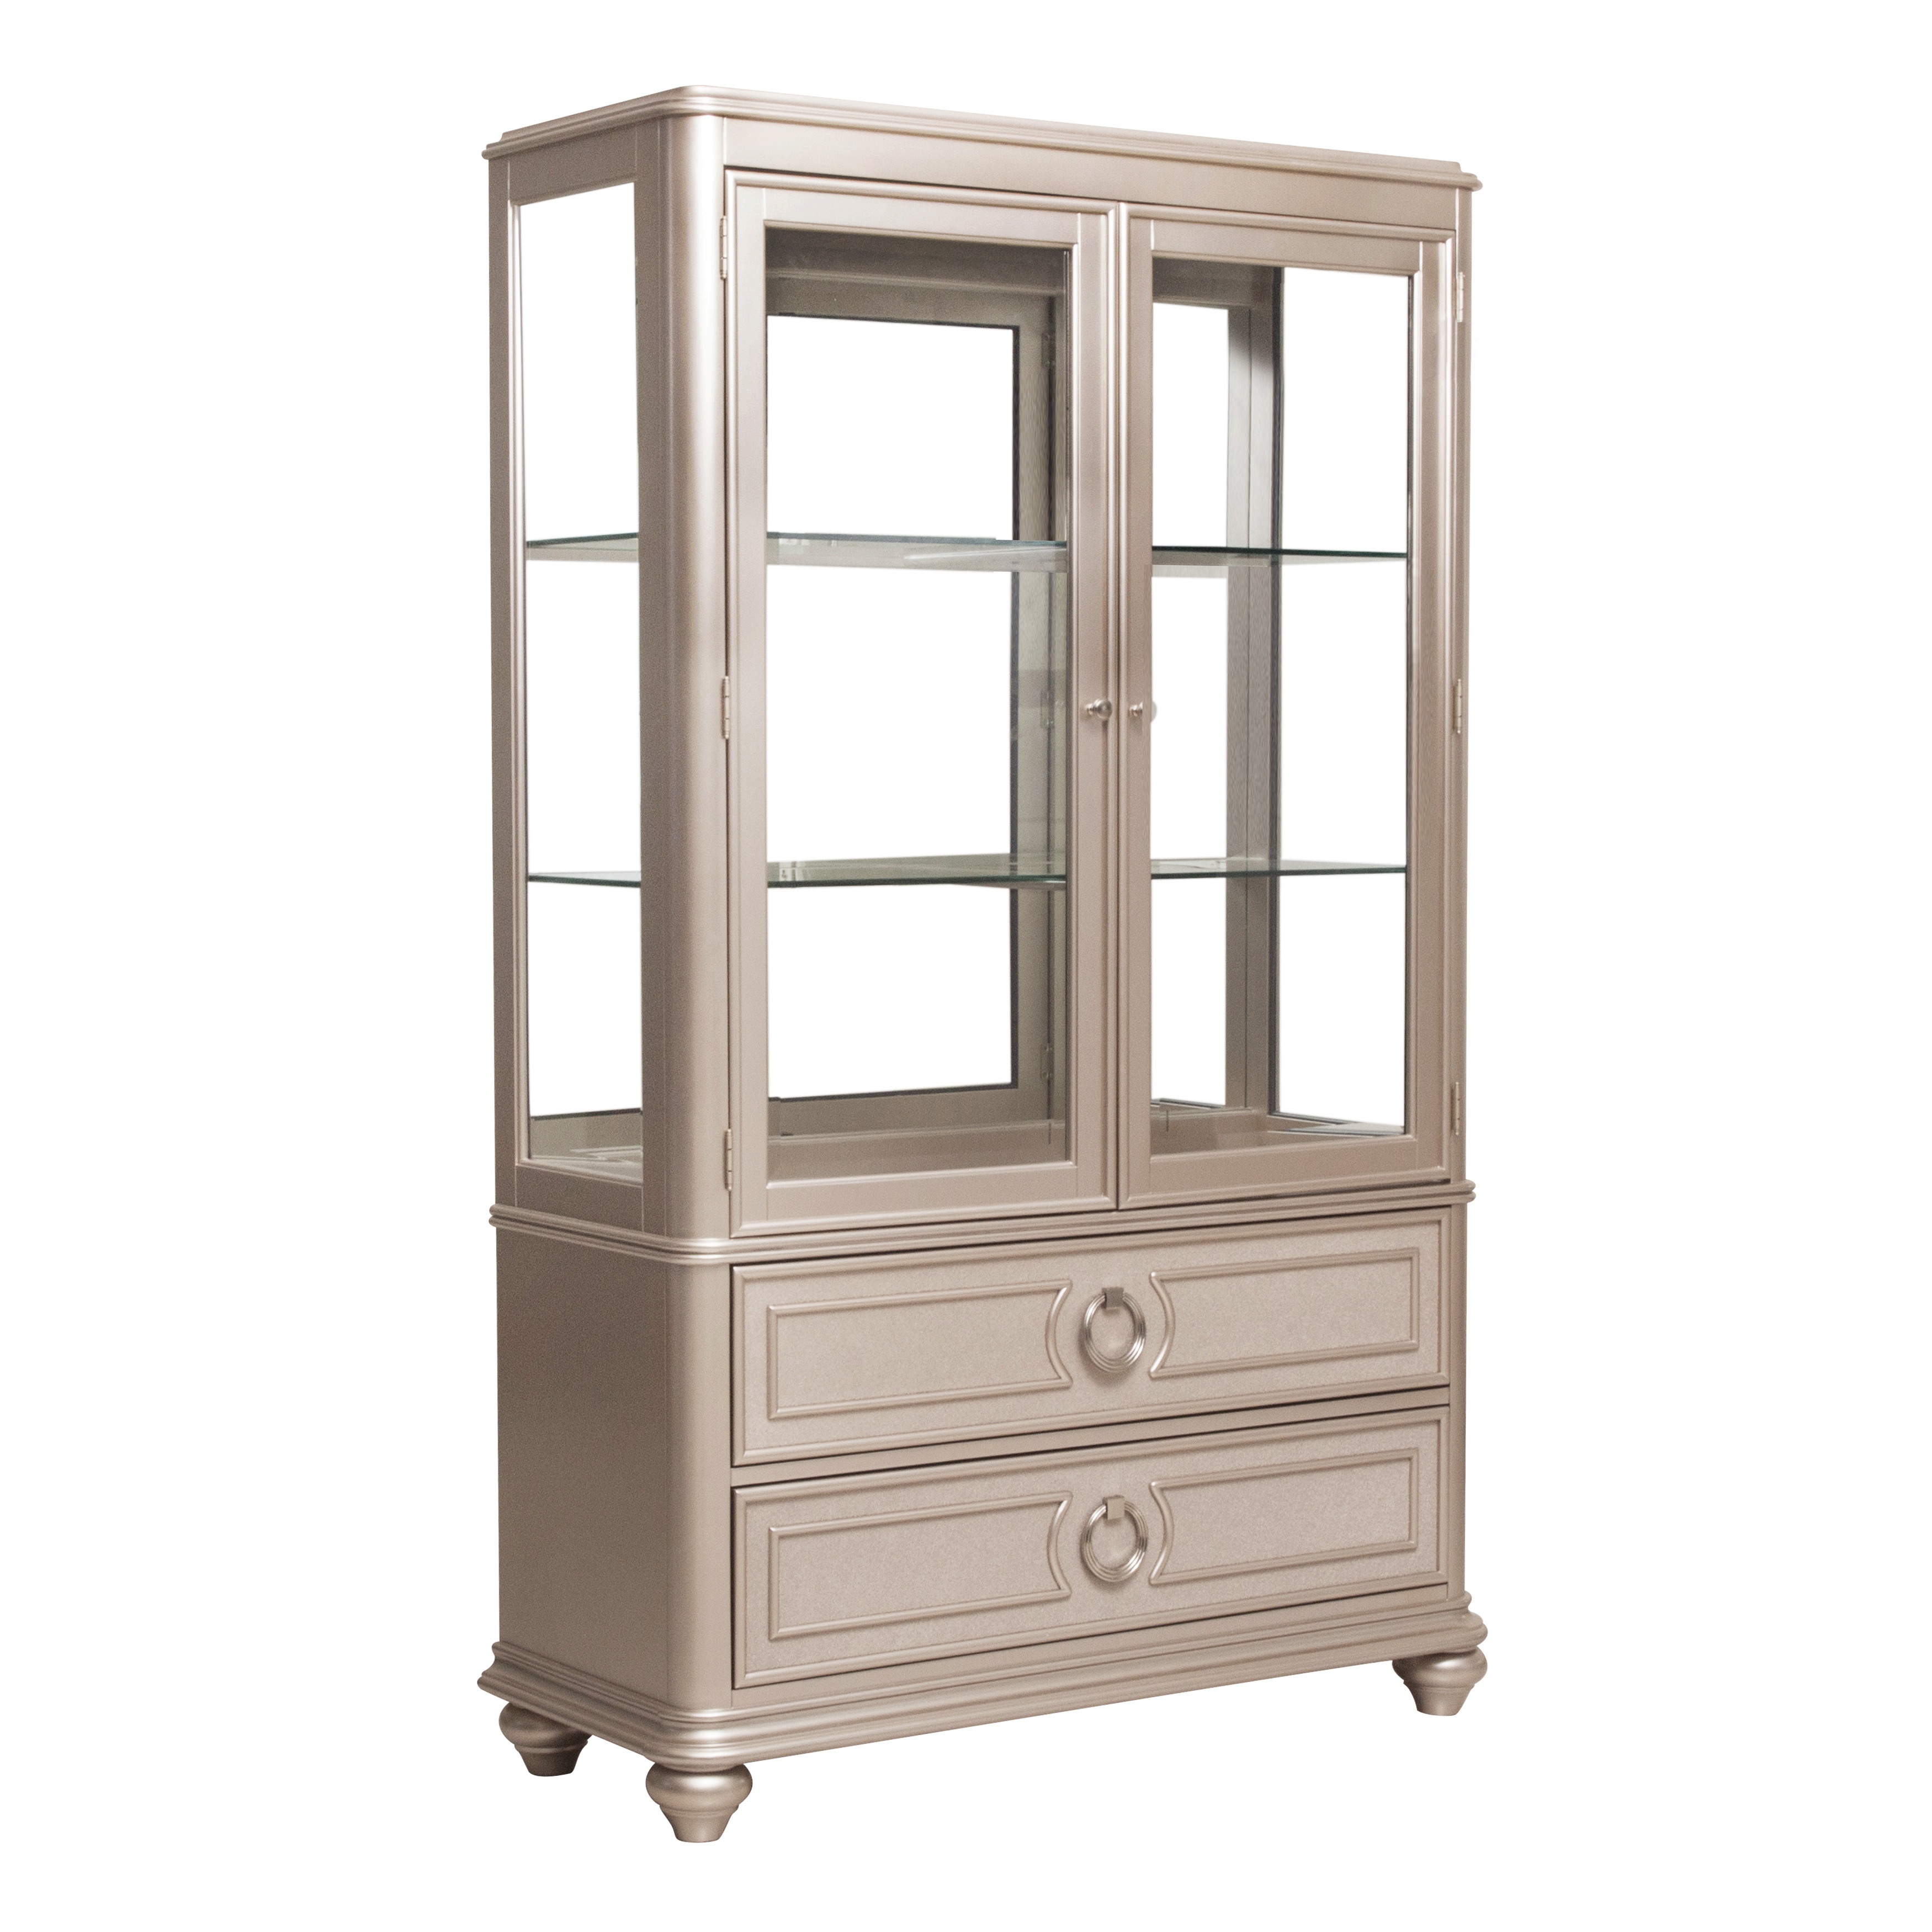 Shop Dynasty China Cabinet Overstock 17667120